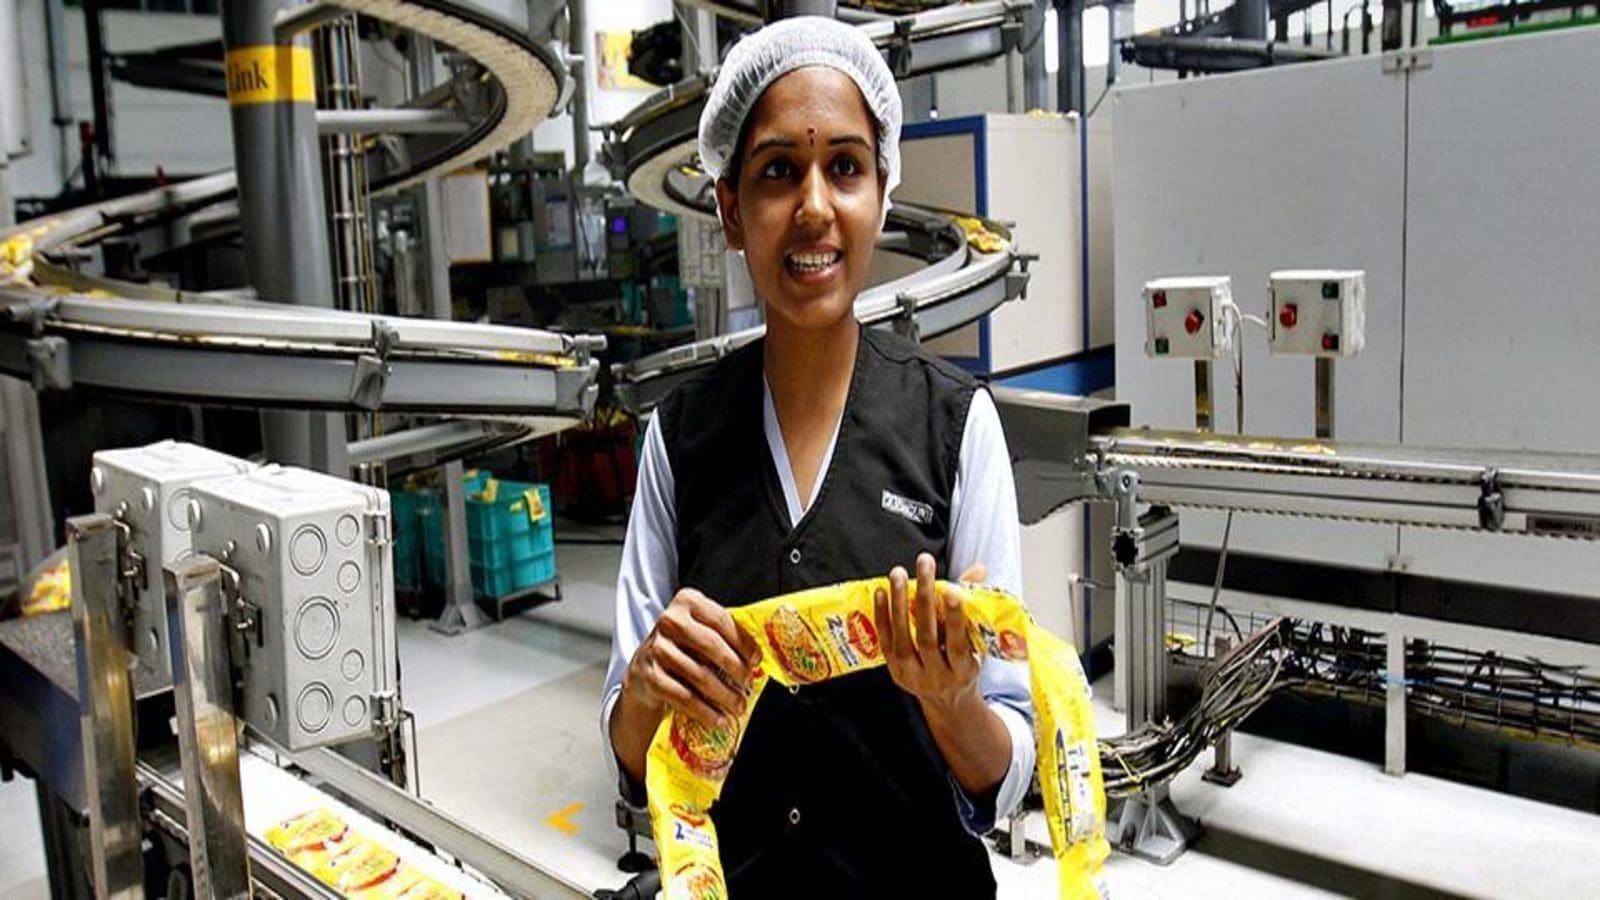 Nestlé India doubles down on women employment as Grofers works on building an inclusive work environment